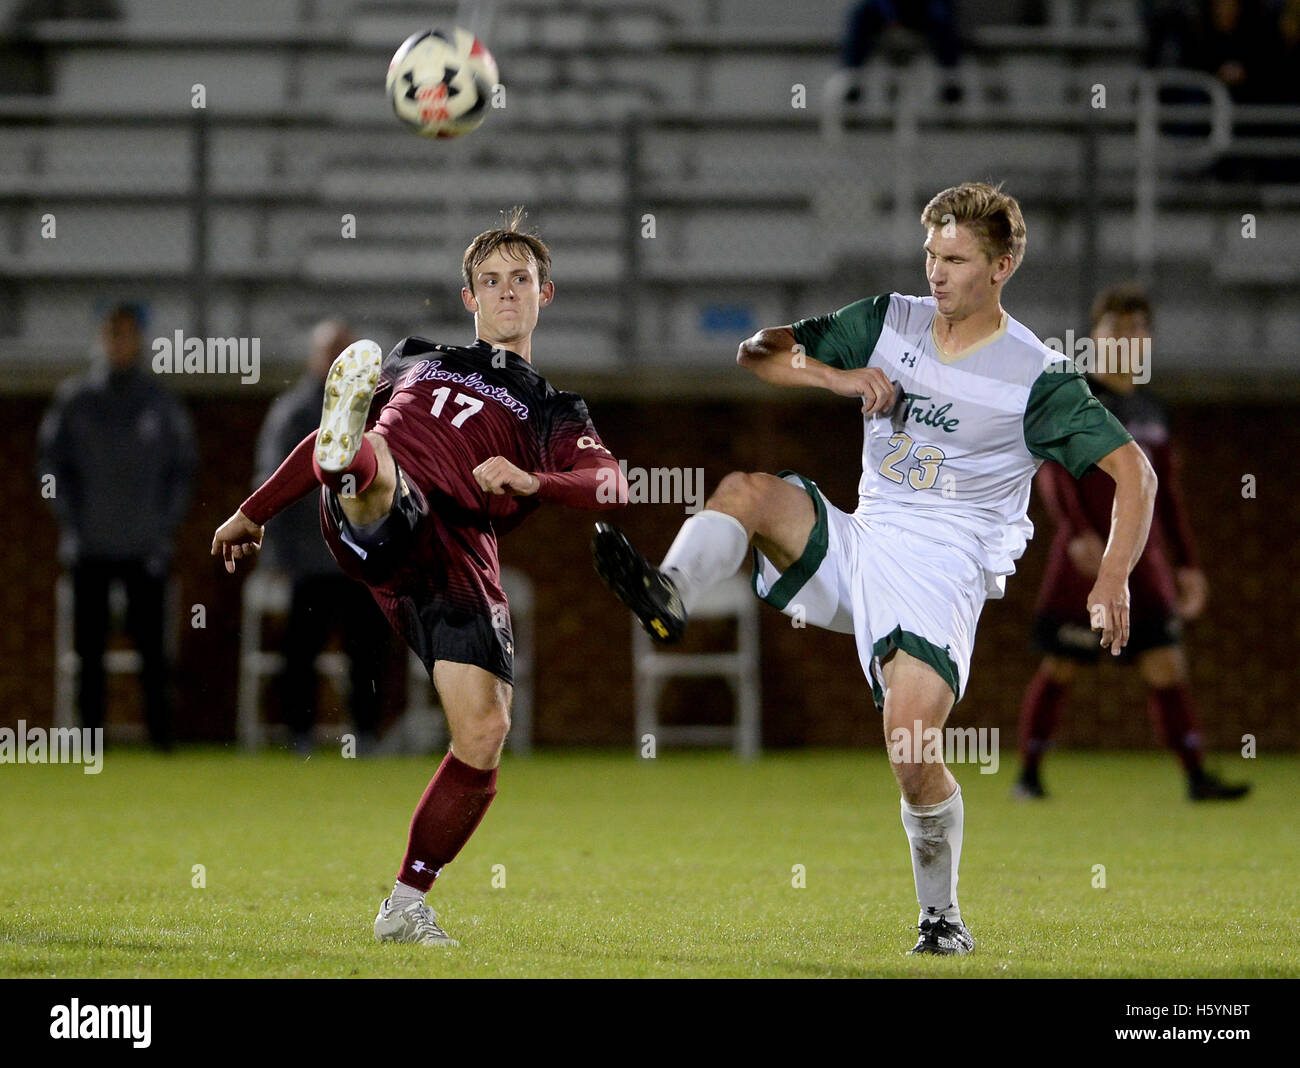 Williamsburg, VA, USA. 22nd Oct, 2016. 20161022 - College of Charleston midfielder ELI DENT (17) launches a pass against William and Mary midfielder RILEY SPAIN (23) in the first half at Martin Family Stadium in Williamsburg, Va. © Chuck Myers/ZUMA Wire/Alamy Live News Stock Photo